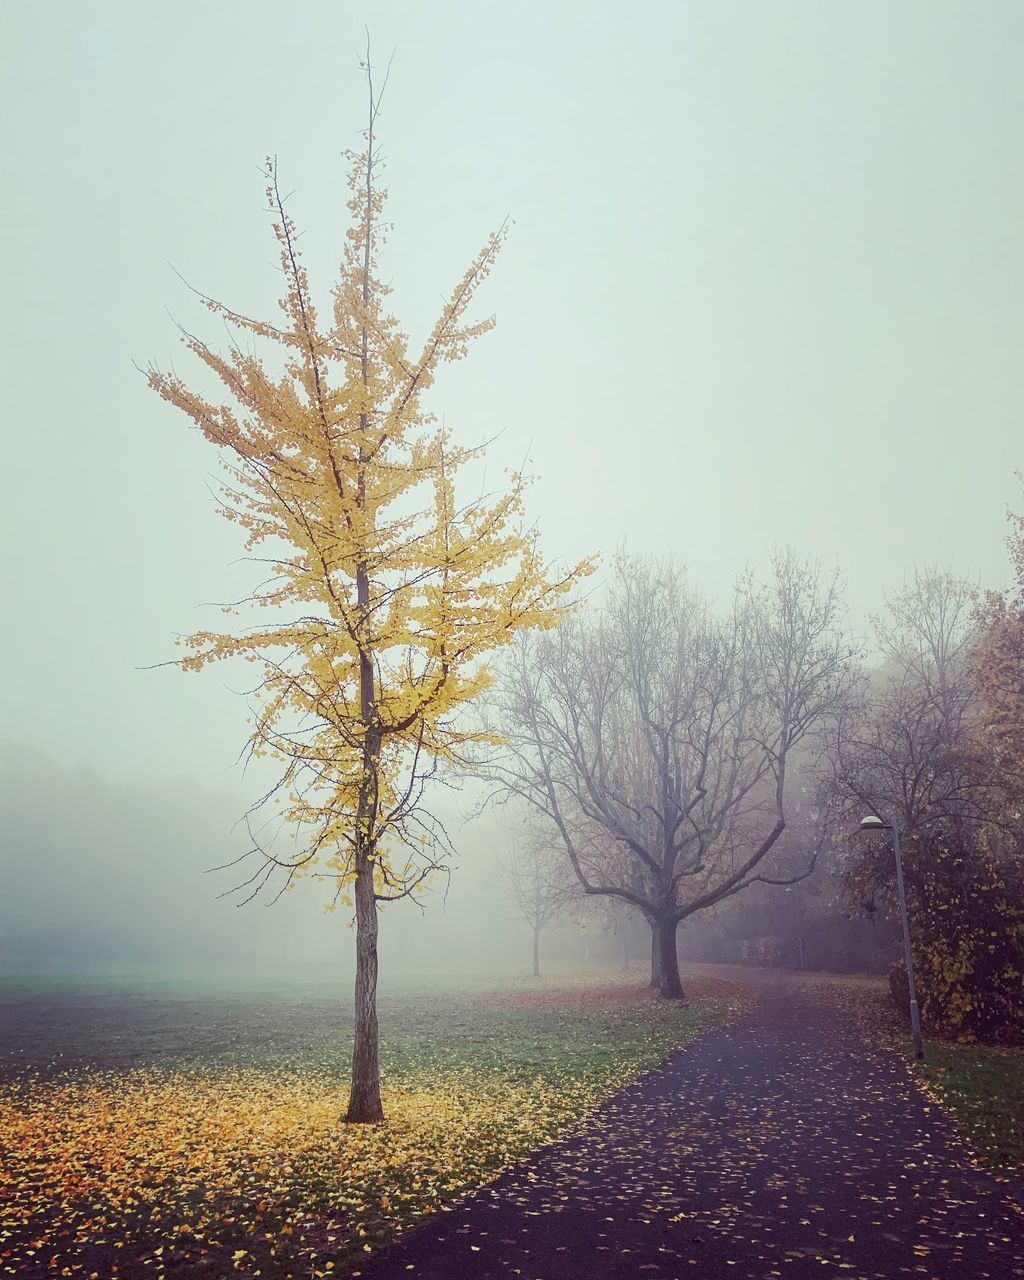 tree, plant, beauty in nature, fog, sky, tranquility, nature, bare tree, tranquil scene, scenics - nature, no people, landscape, autumn, change, environment, field, land, non-urban scene, branch, outdoors, isolated, fall